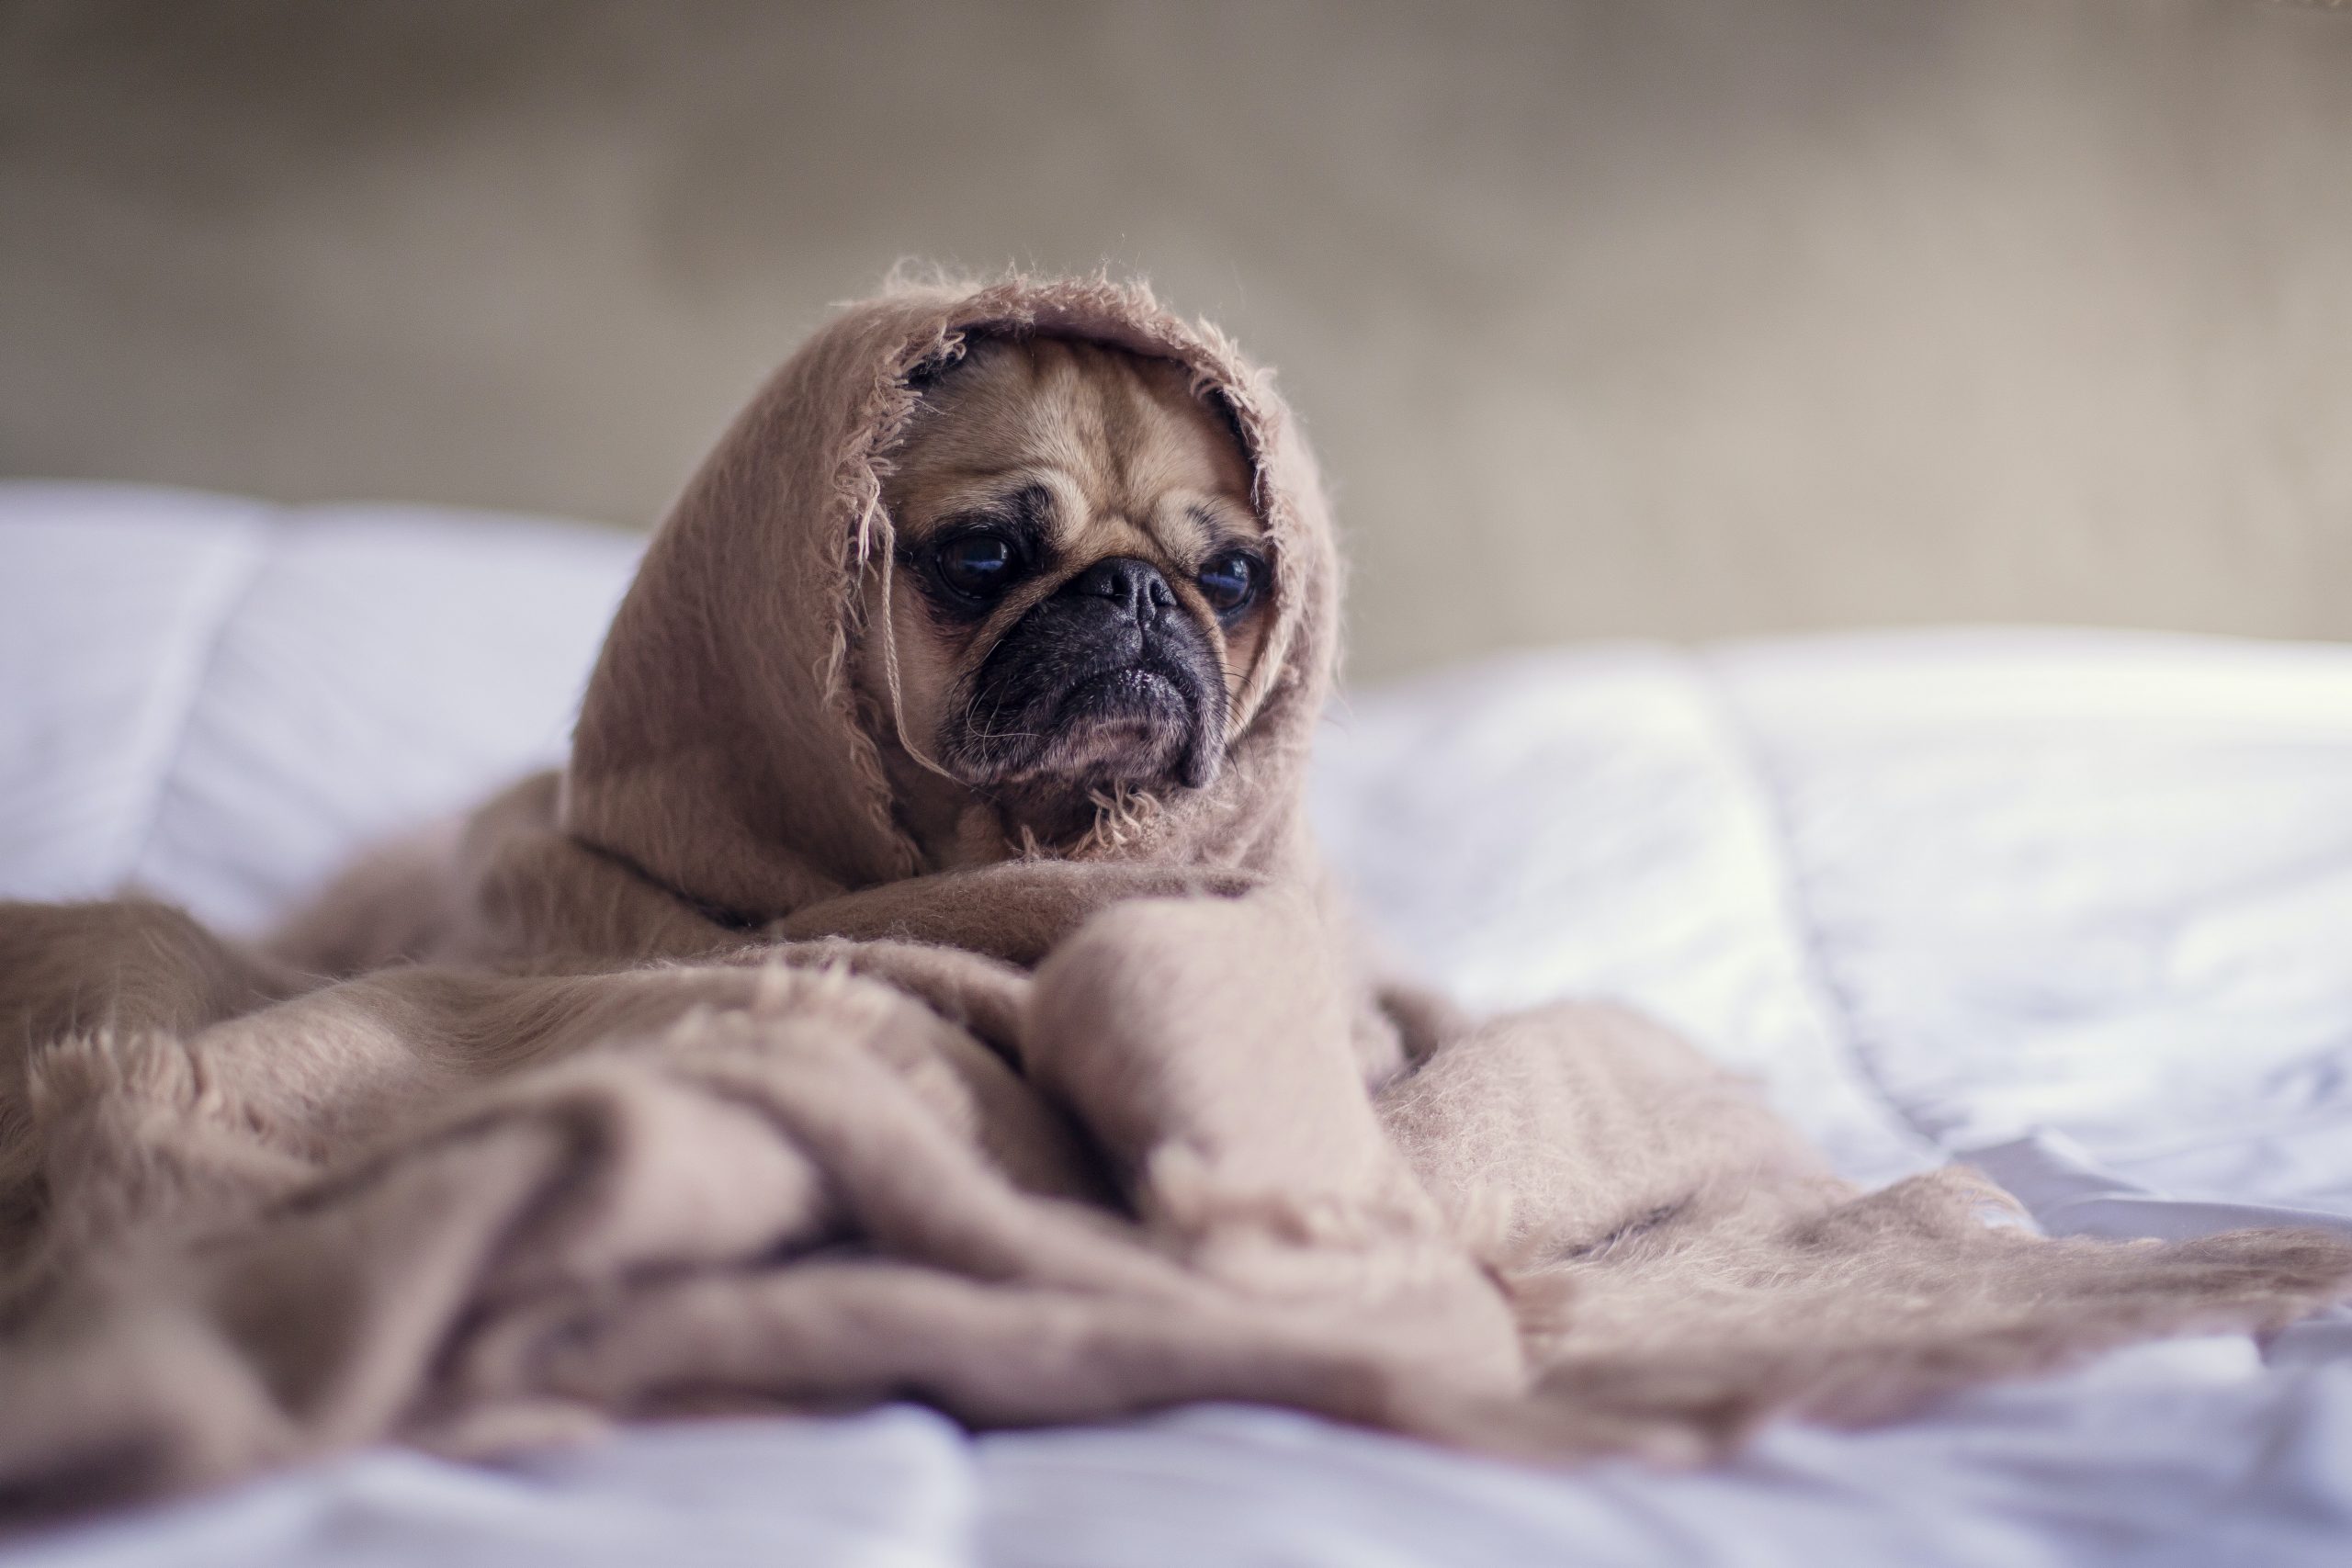 Pug wrapped in a tan blanket on top of a white comforter